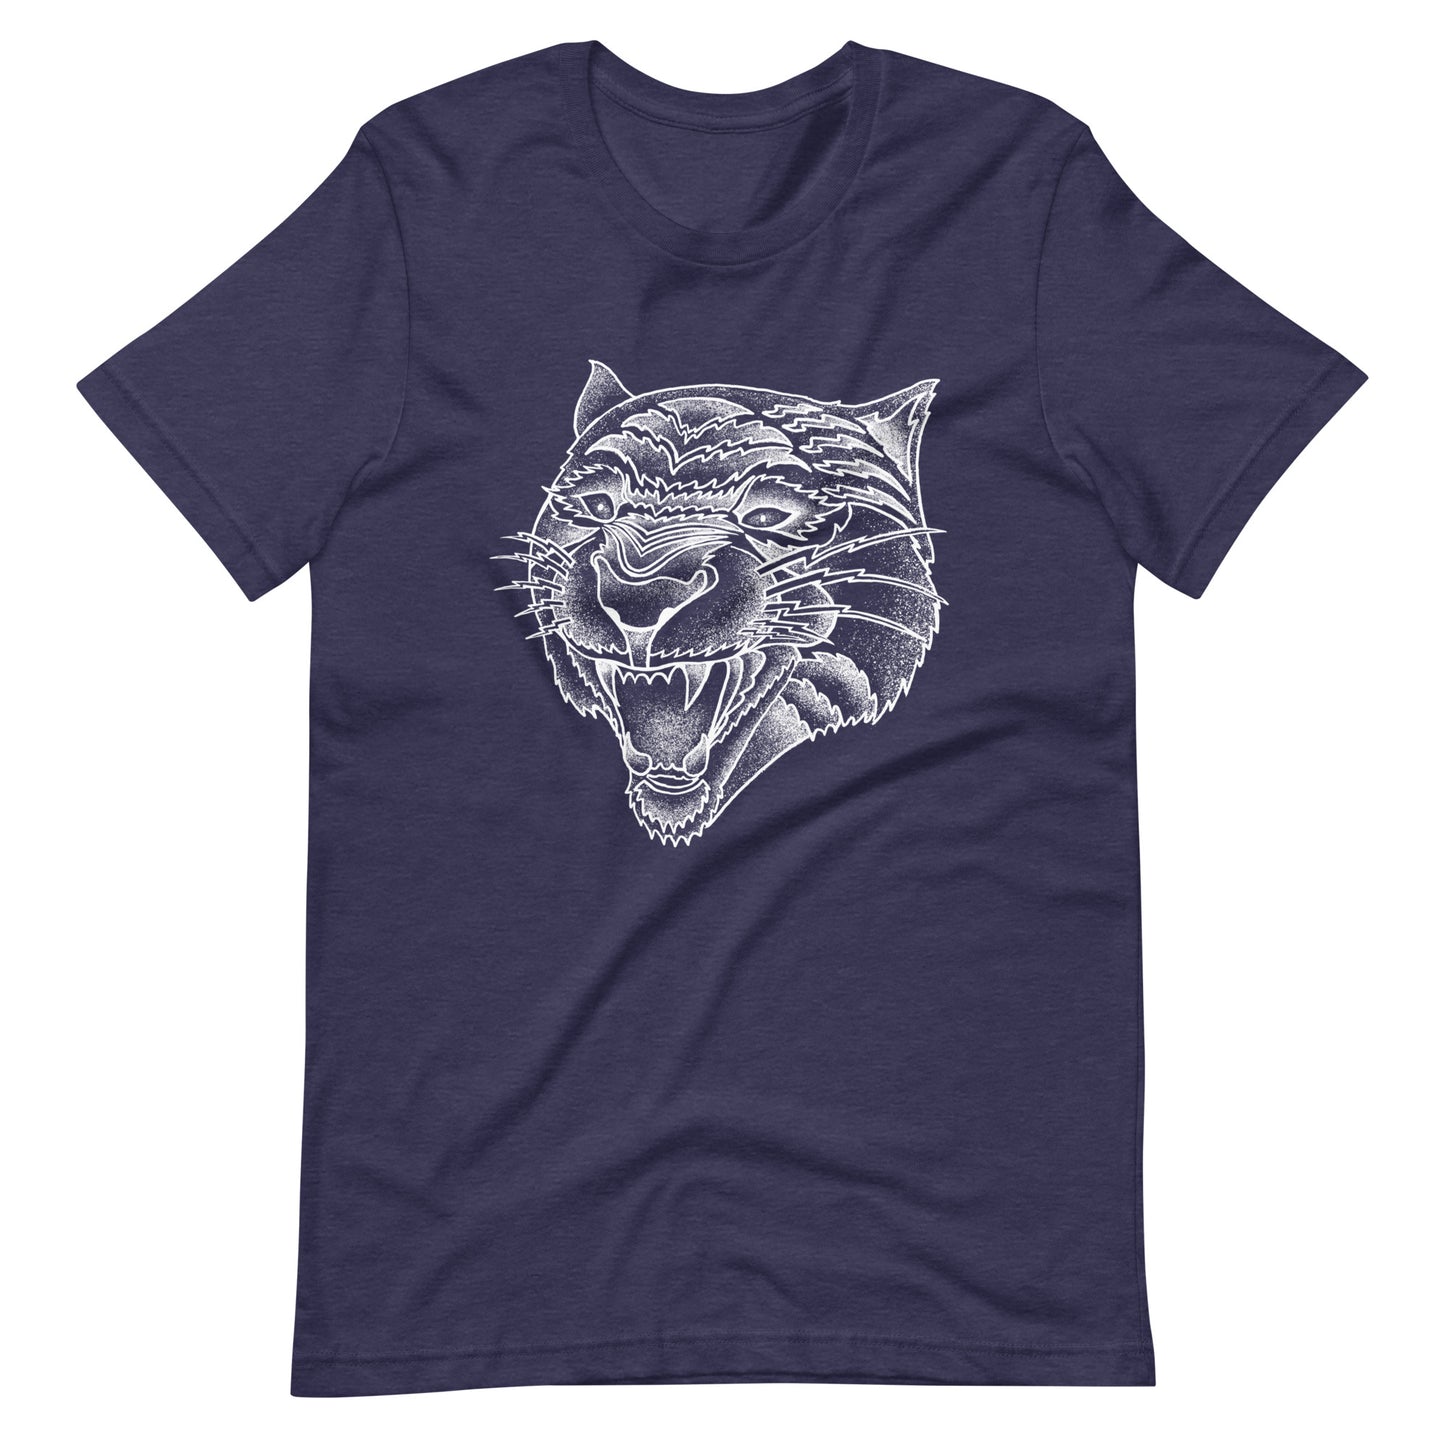 Panther White - Men's t-shirt - Heather Midnight Navy Front